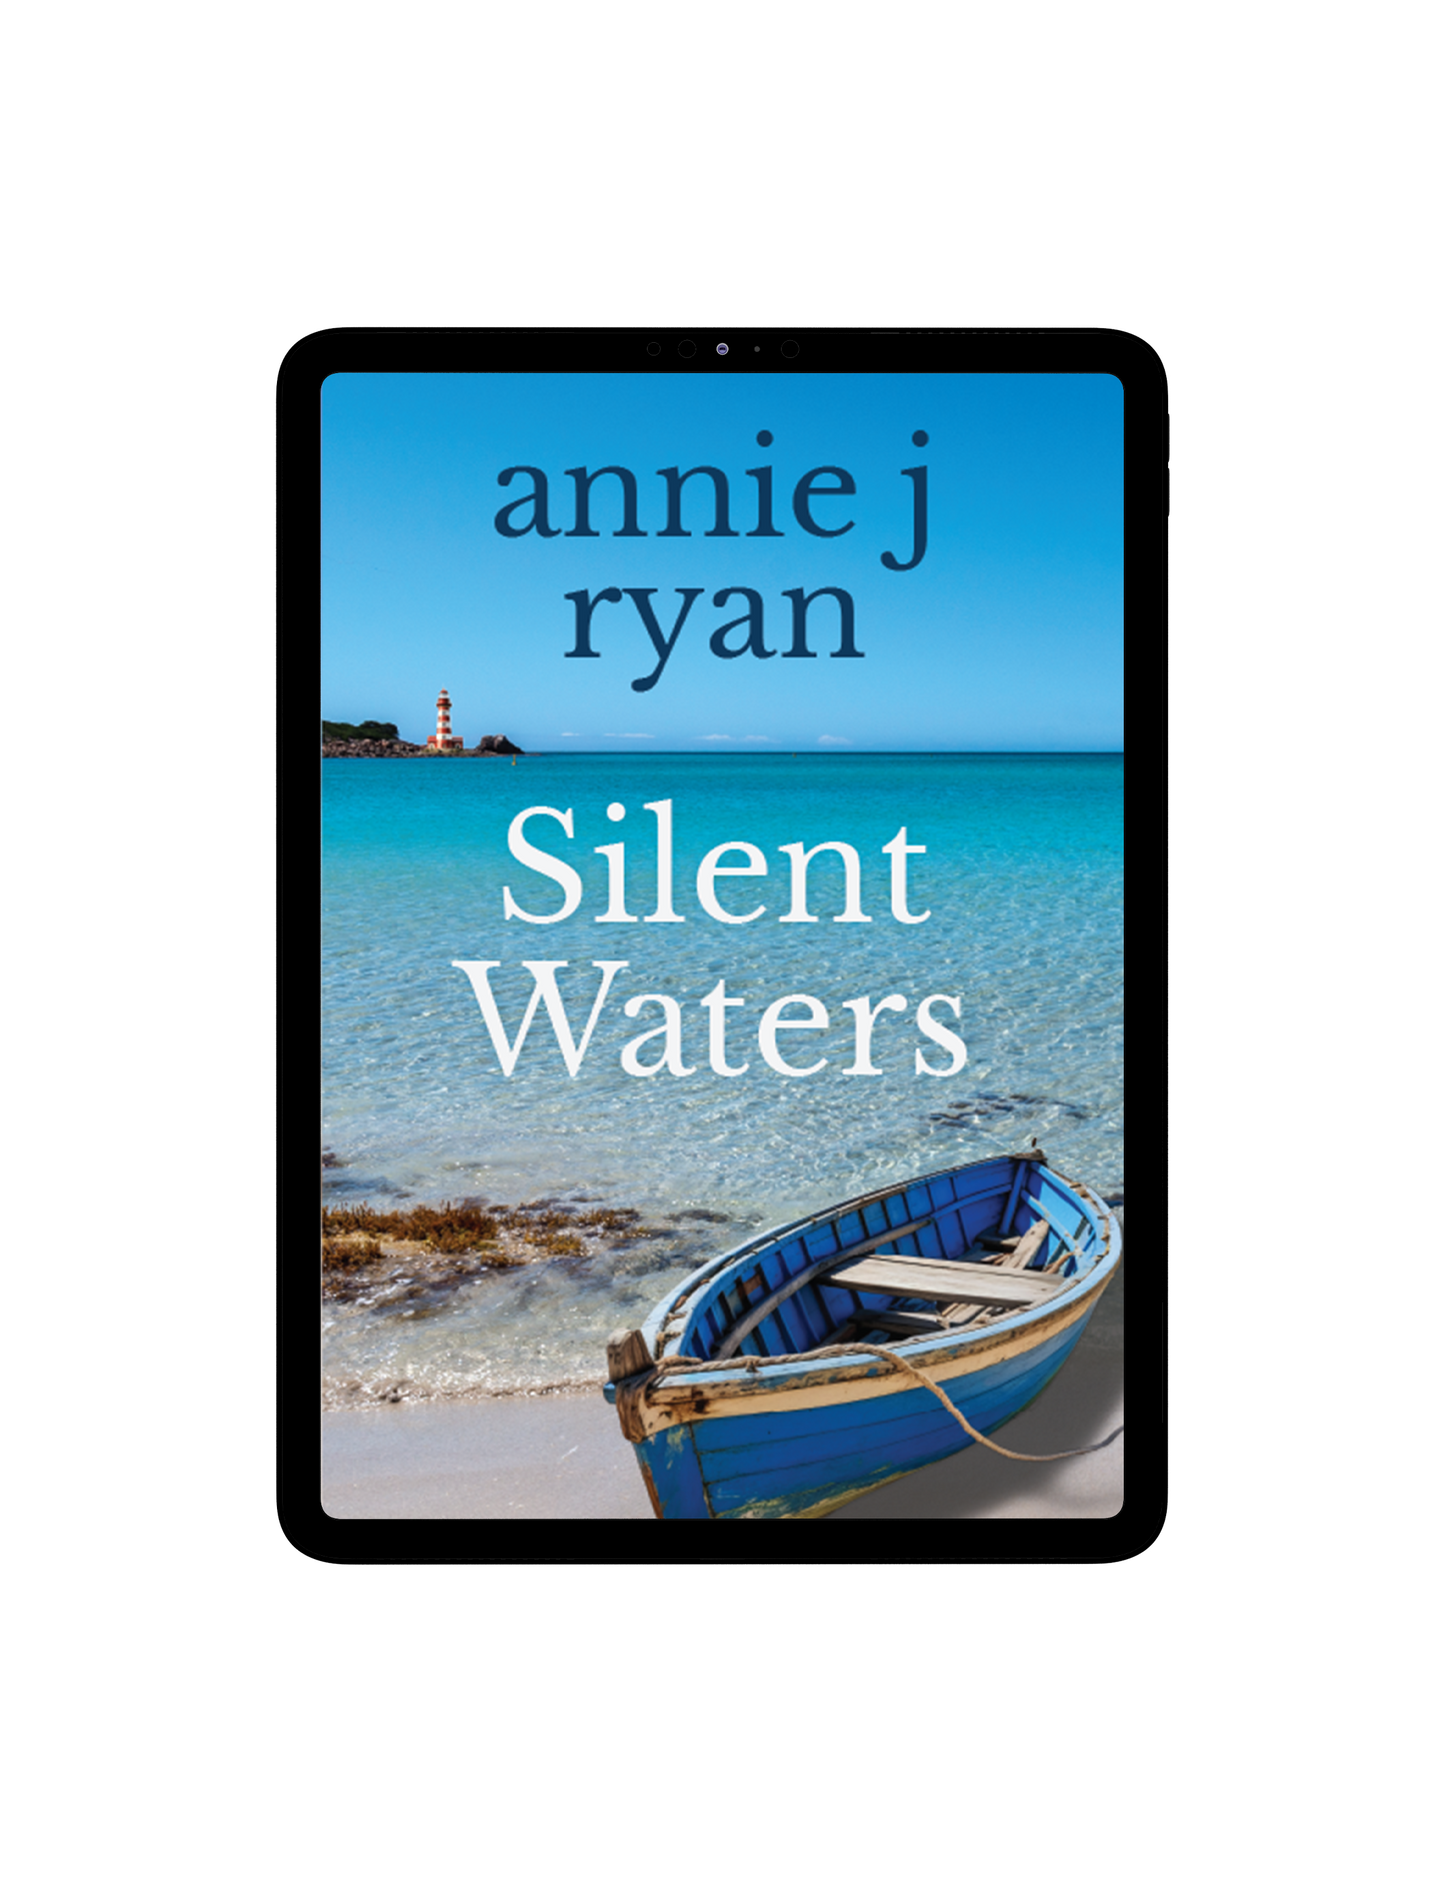 Silent Waters, Annie J Ryan, Author, women's fiction, romantic suspense, family life drama, secrets, mystery, intrigue, book club reads, beach reads, contemporary fiction,